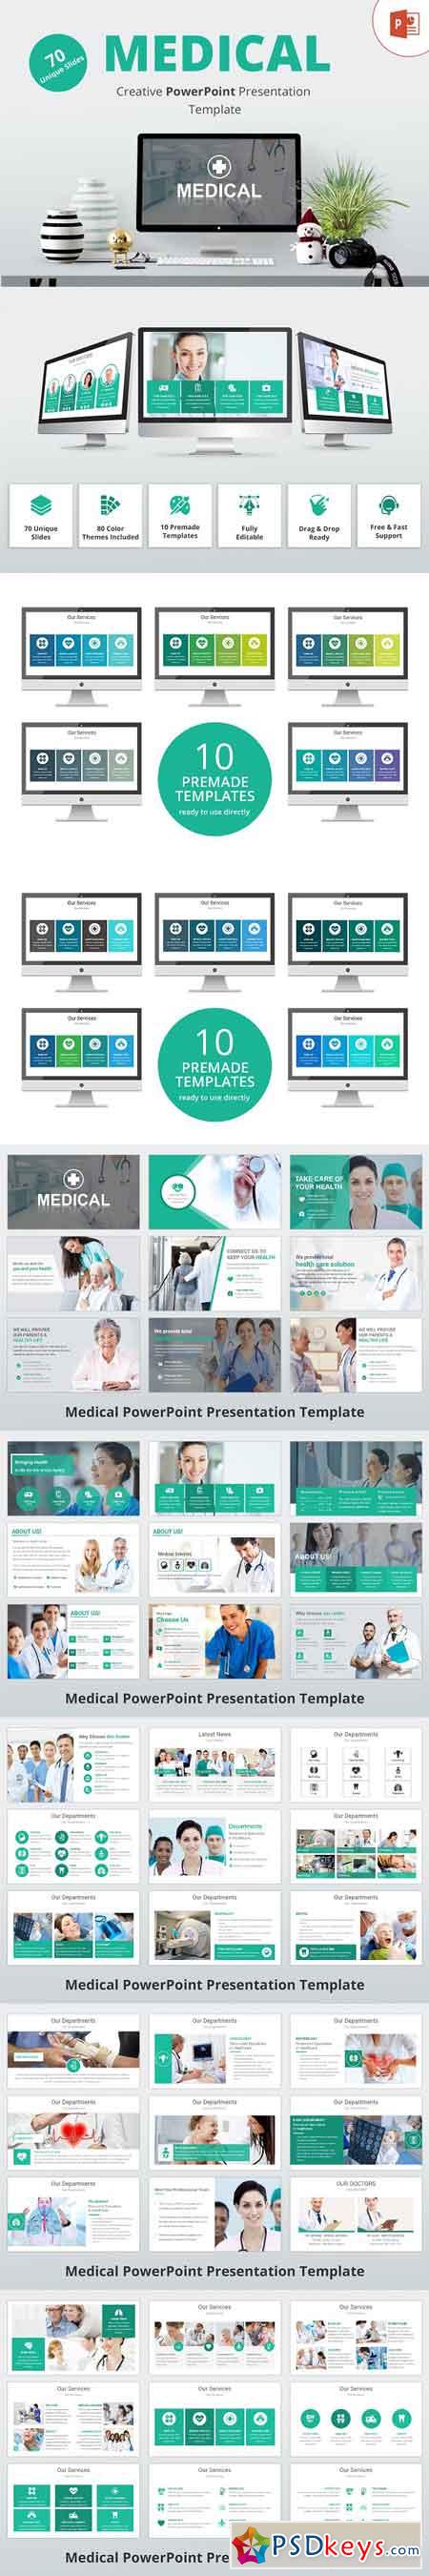 Medical PowerPoint Template 2913006